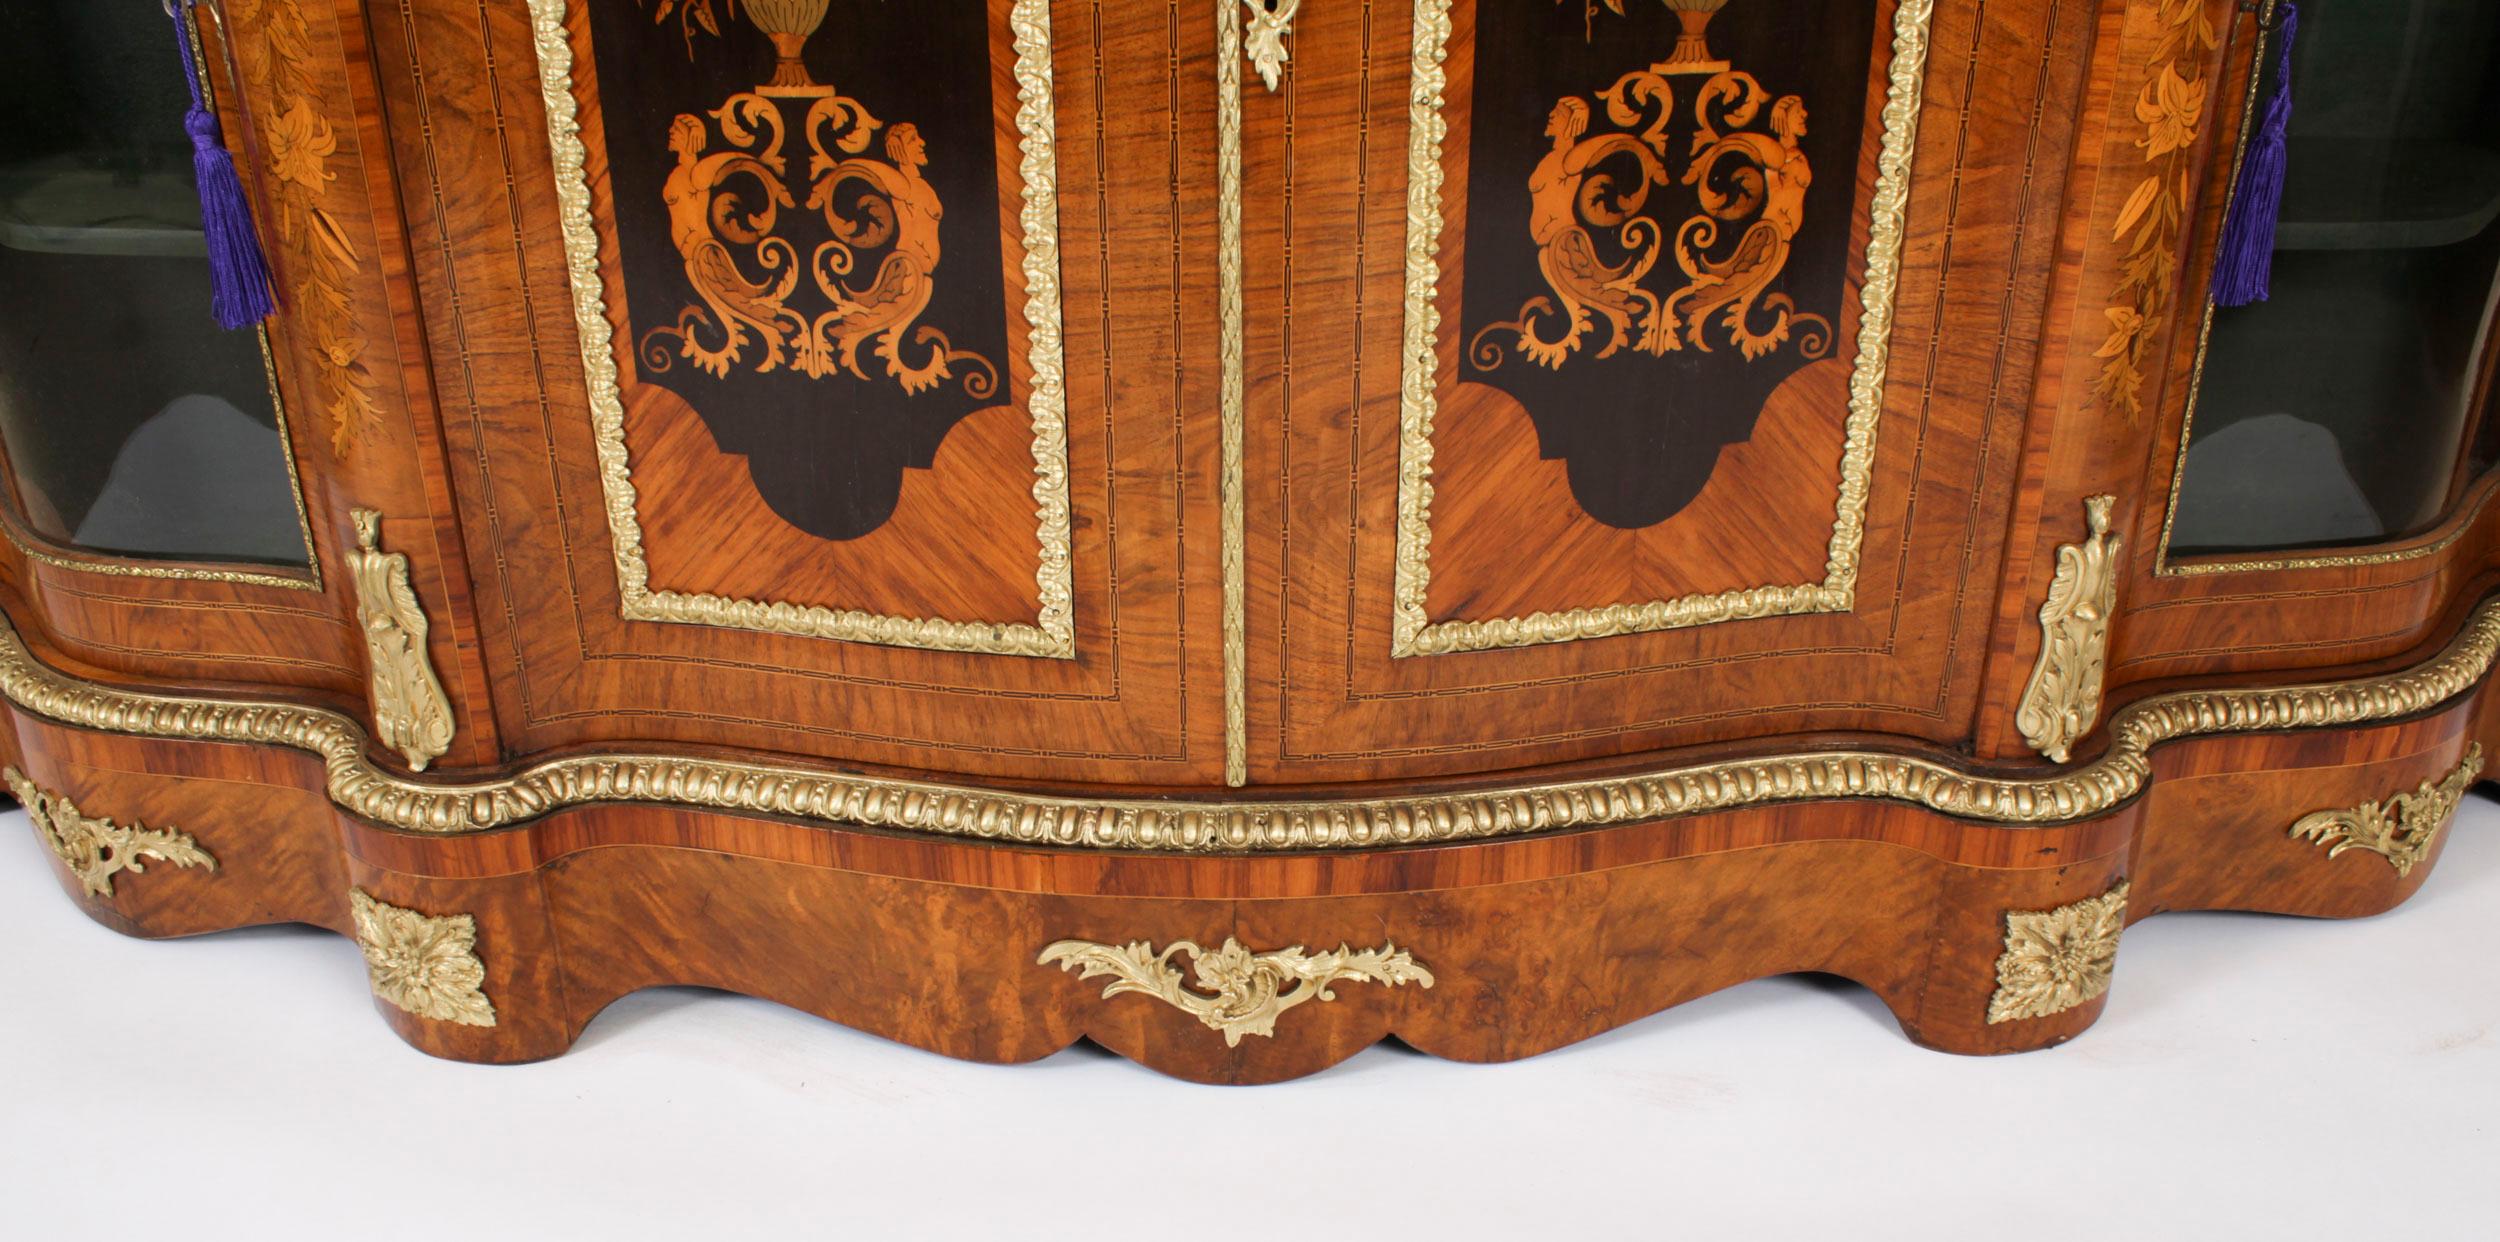 Antique Large Ormolu Mounted Walnut & Marquetry Serpentine Credenza 19th C For Sale 6